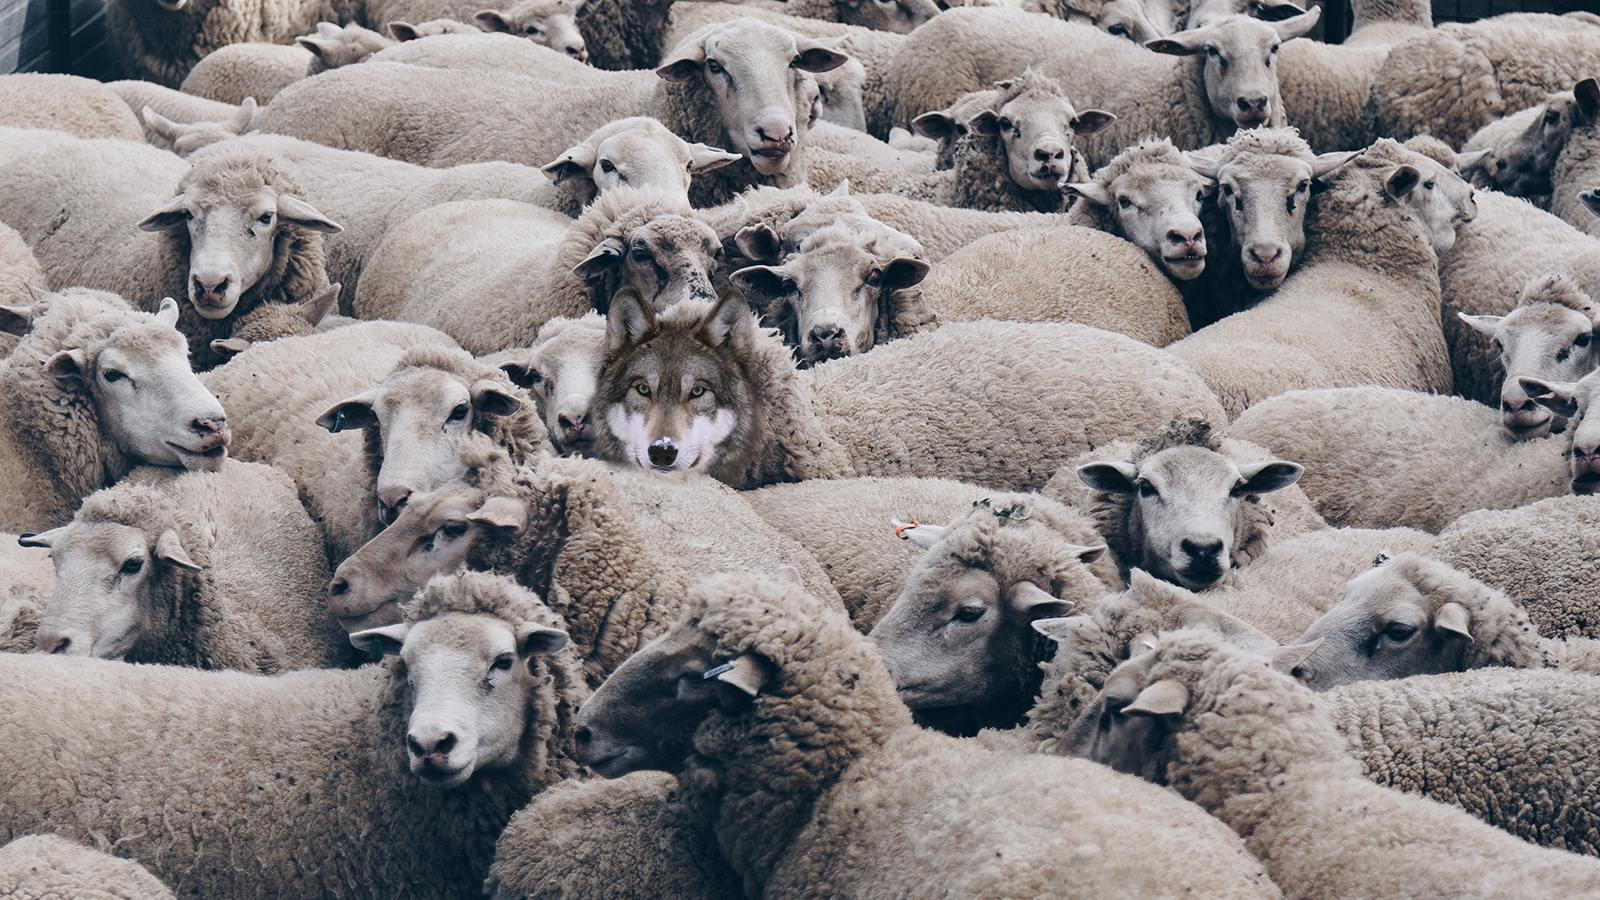 A wolf in sheep's clothing: peddlers of unproven cure in European